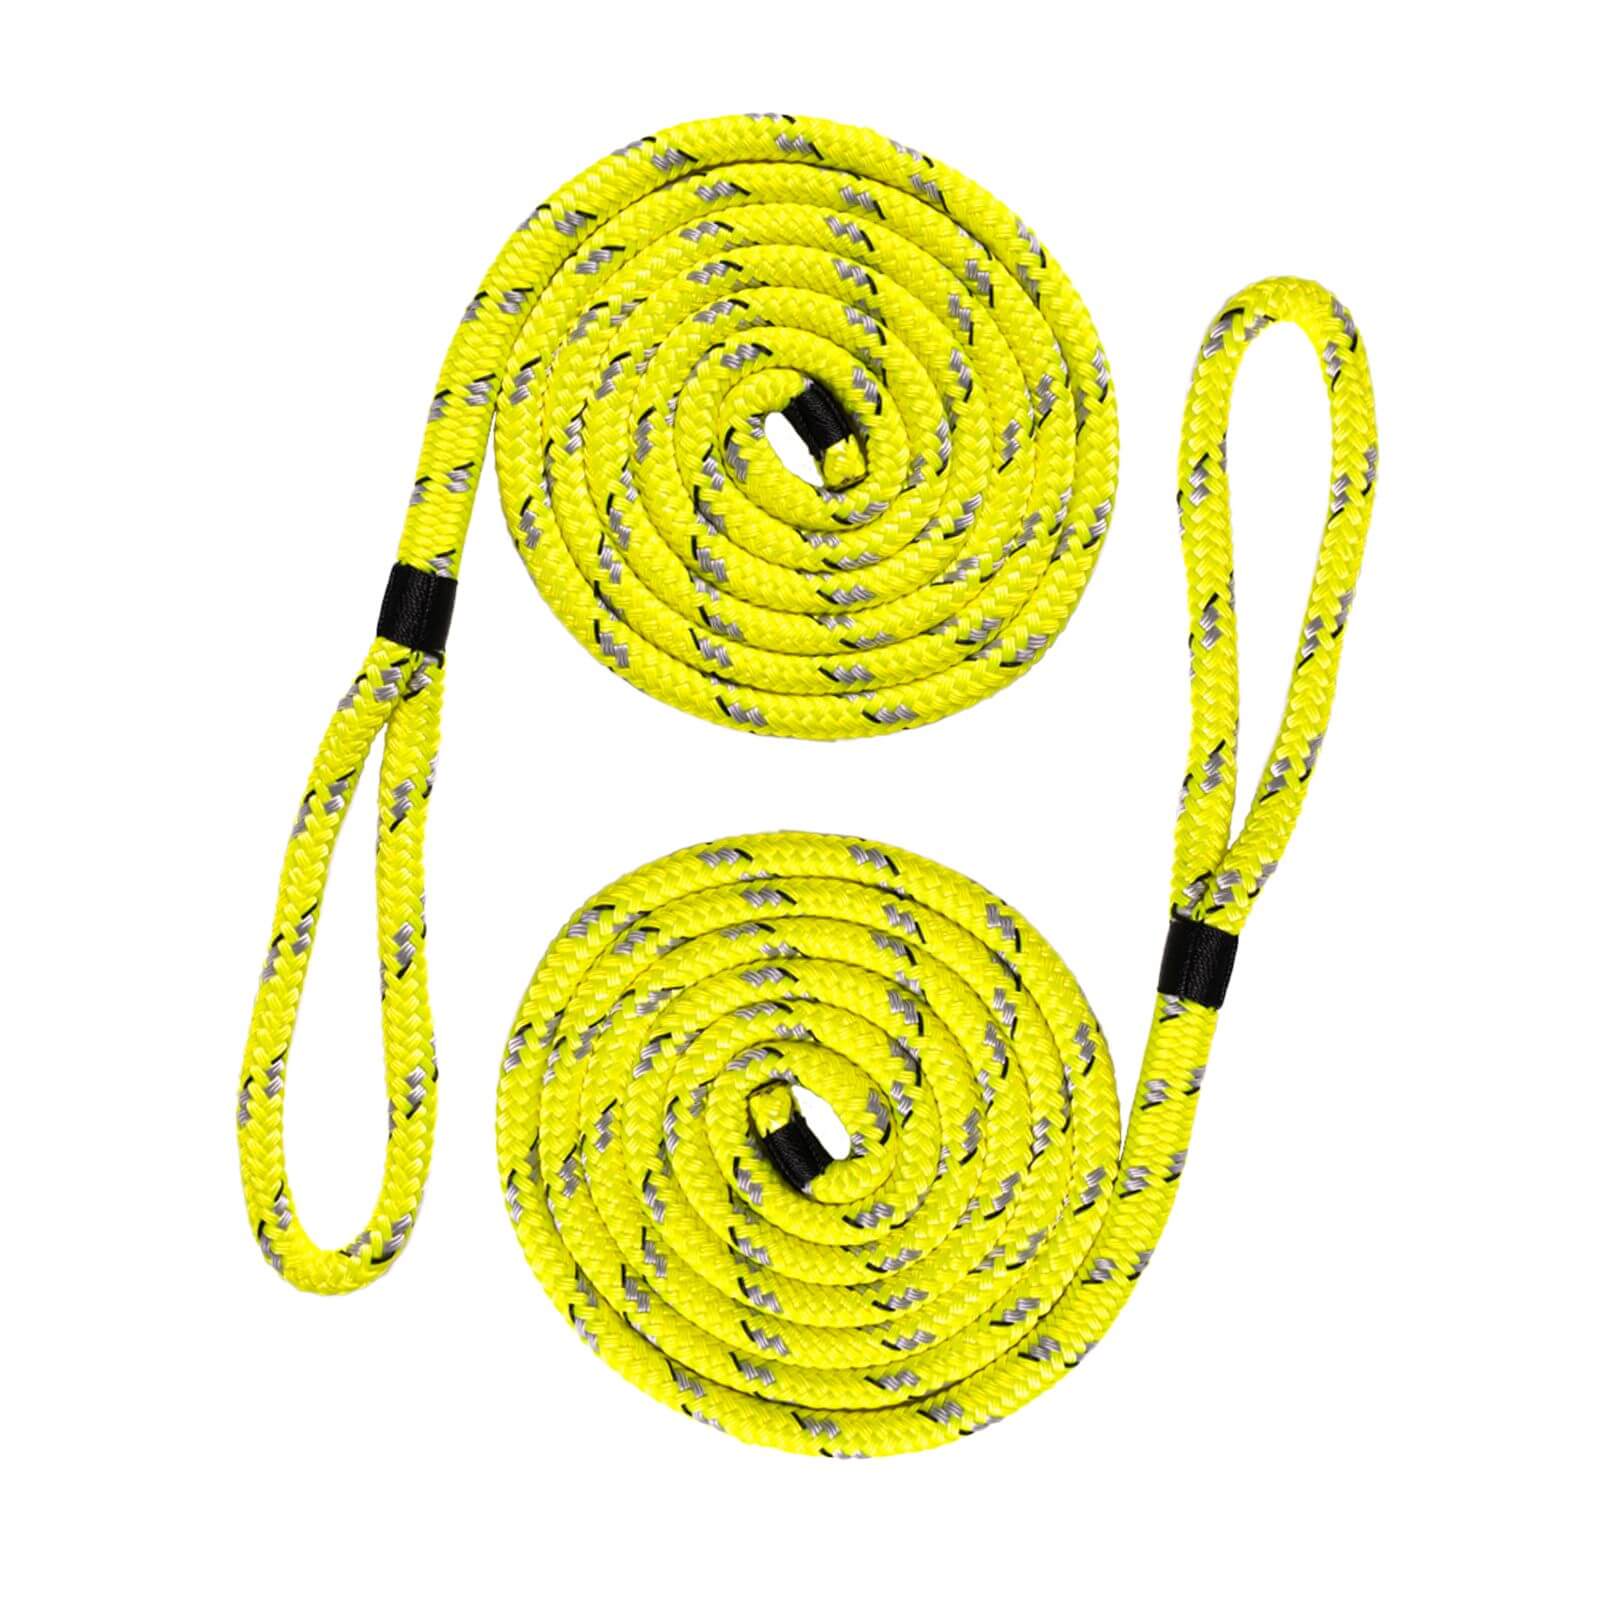 Two yellow MISSION Fender Lines 3/8" x 6' - 2 Pack on a white background.